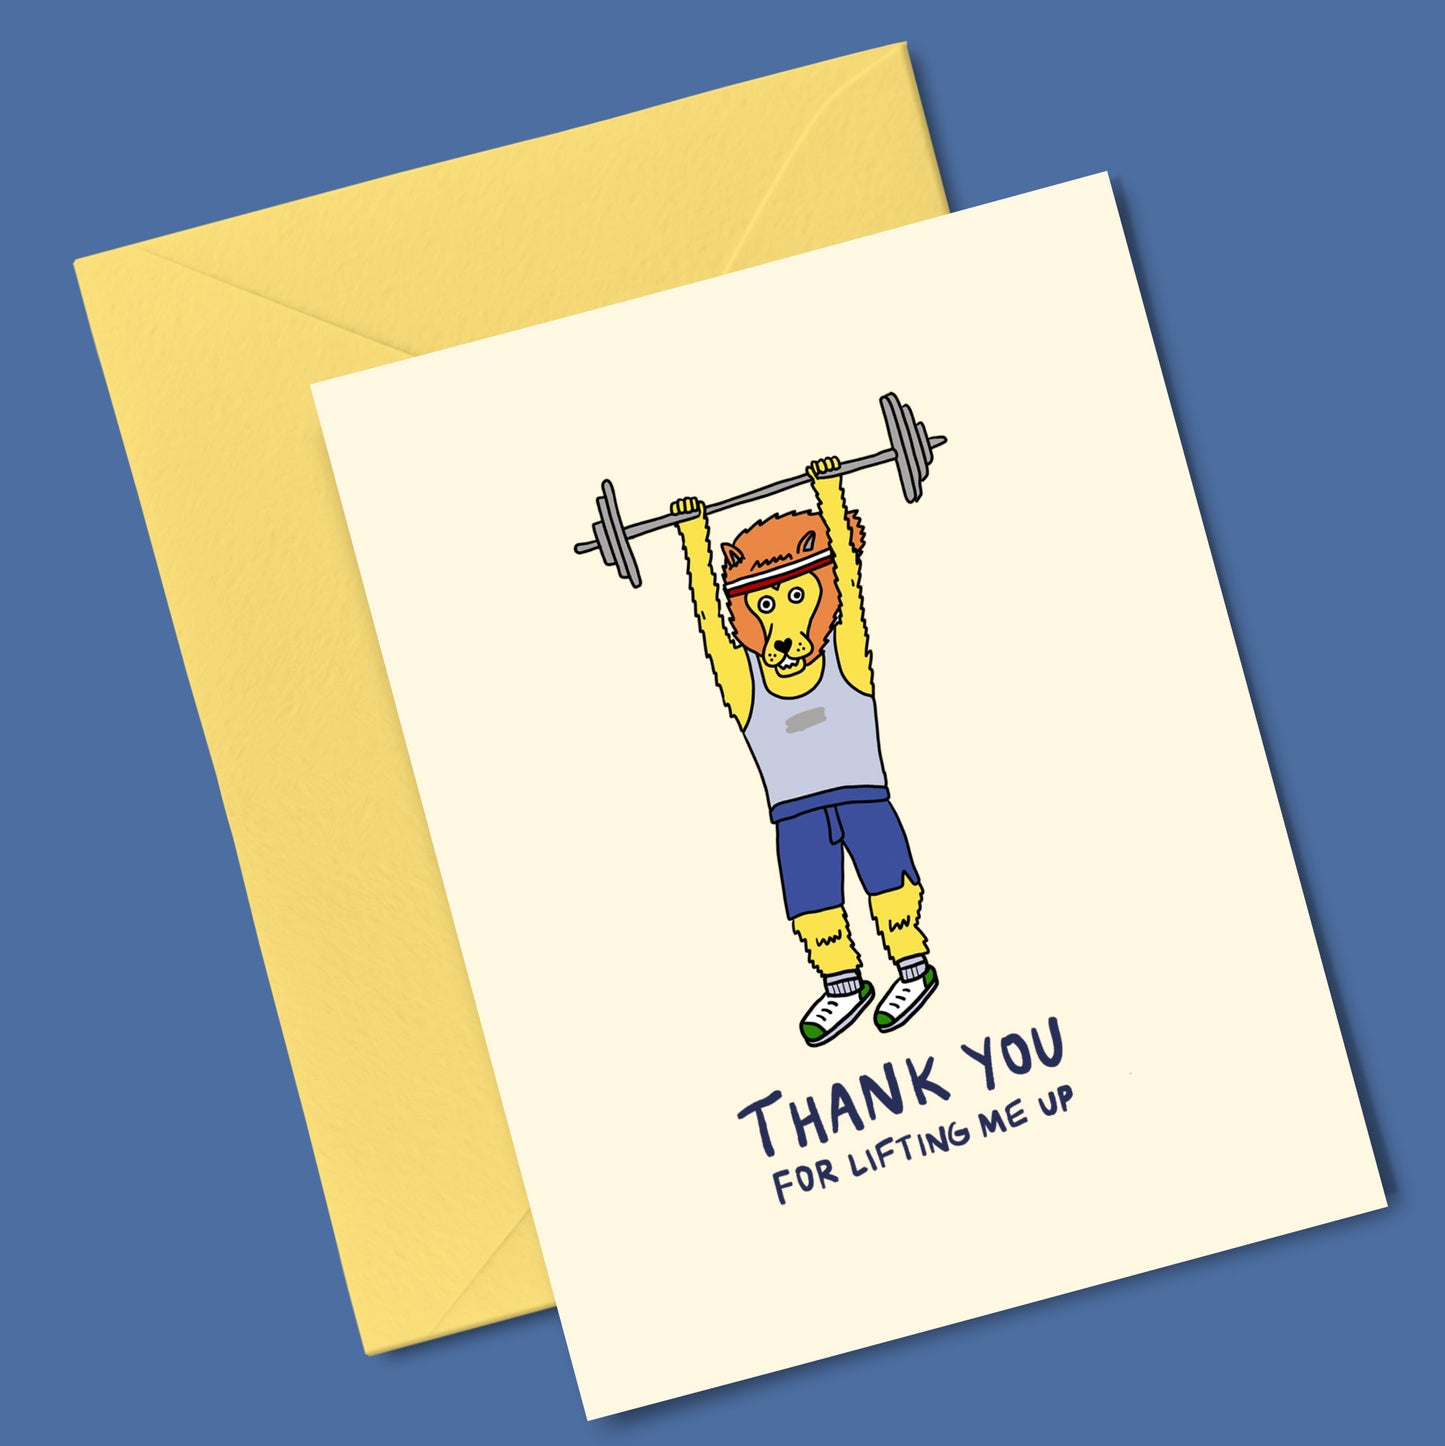 Thank You For Lifting Me Up - Weightlifting Lion - Greeting Card